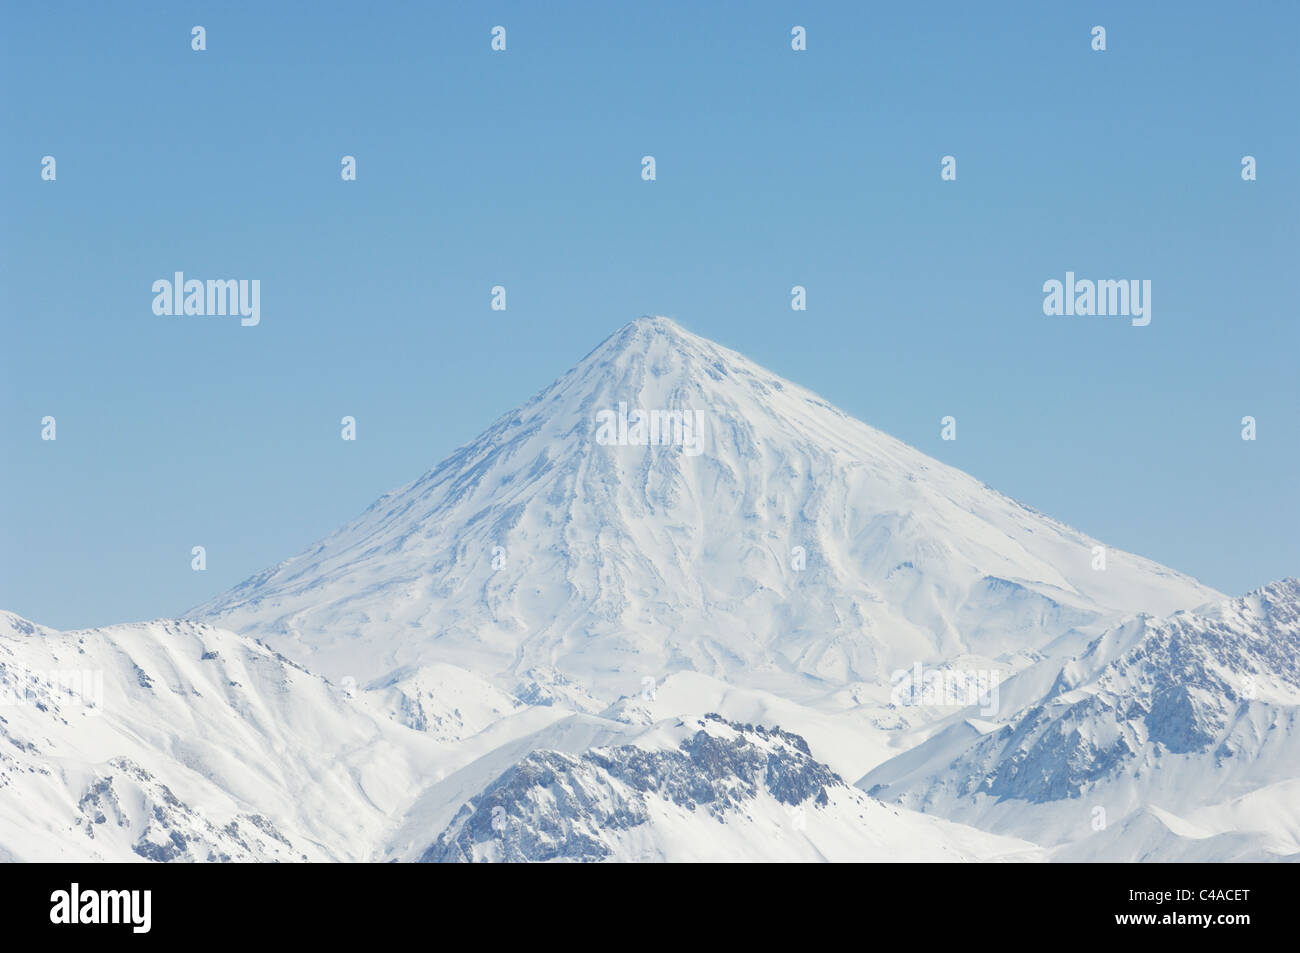 A snow covered Mount Damavand in the Alborz mountains of Iran Stock Photo